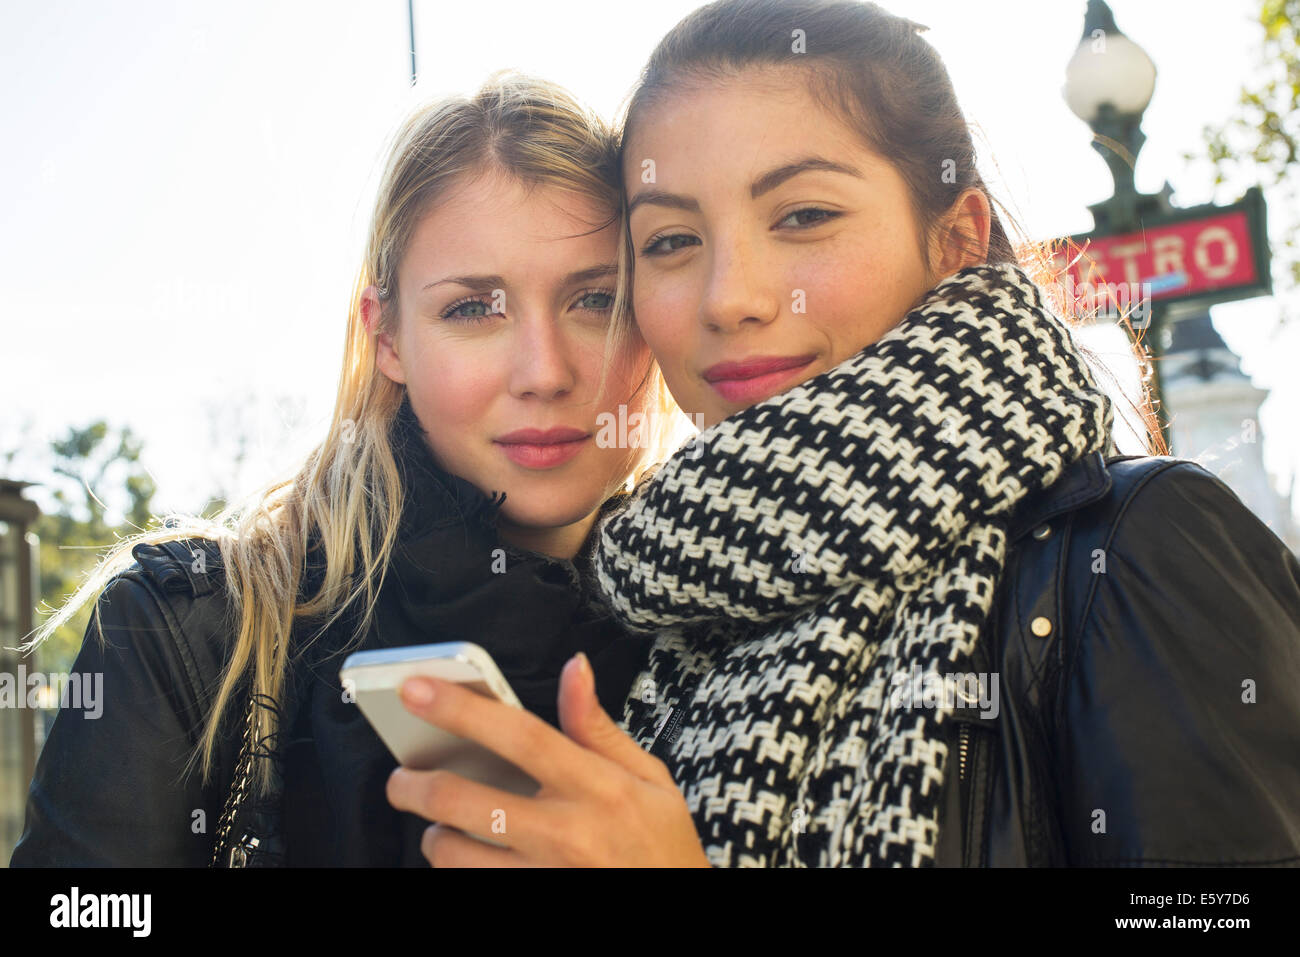 Young women outdoors looking at cell phone together Stock Photo